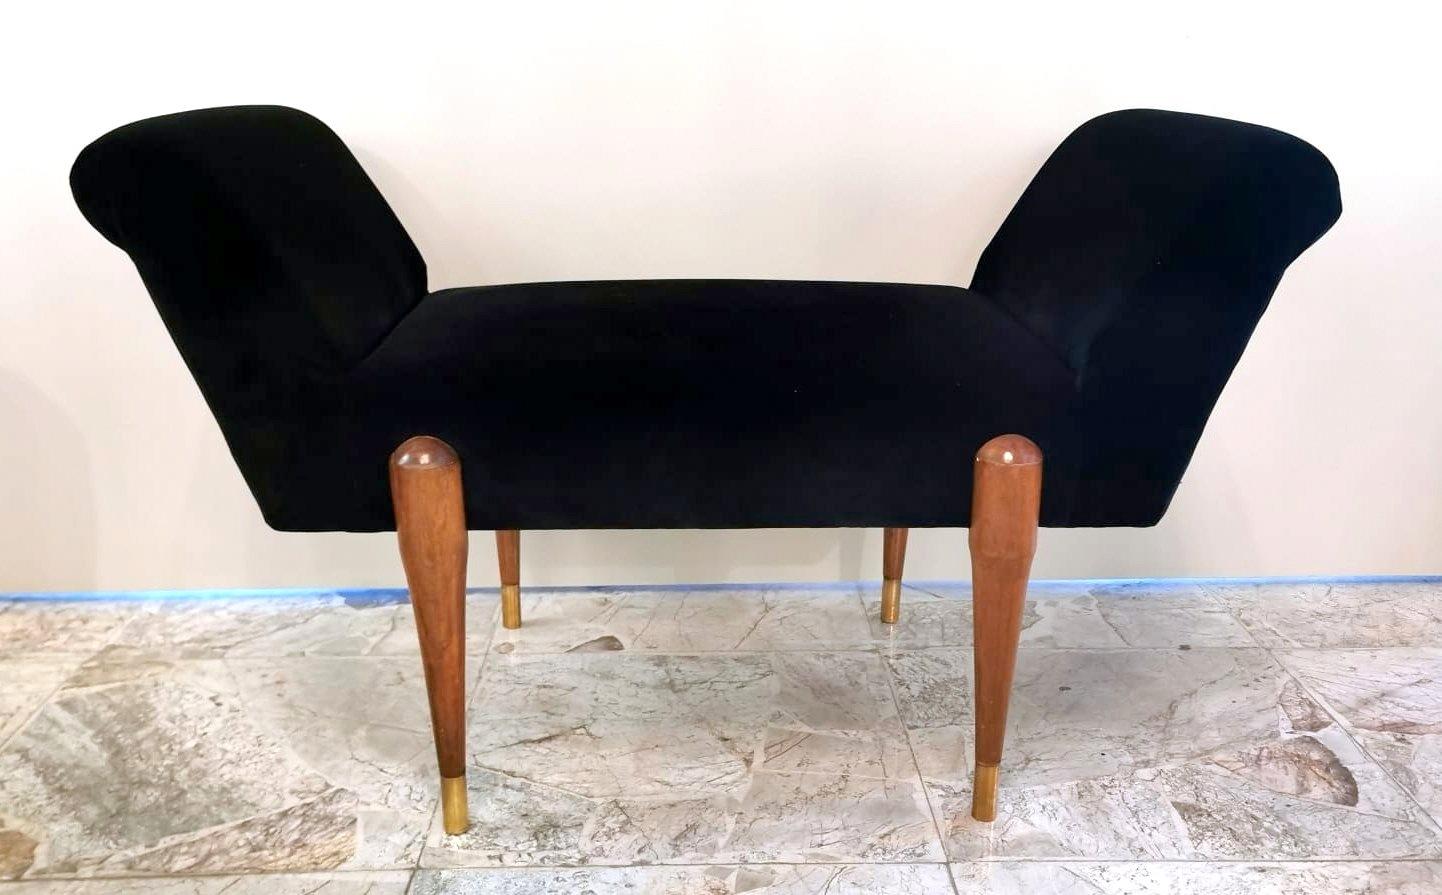 We kindly suggest you read the whole description, because with it we try to give you detailed technical and historical information to guarantee the authenticity of our objects.
Italian bench with a solid walnut structure with two inclined backs at